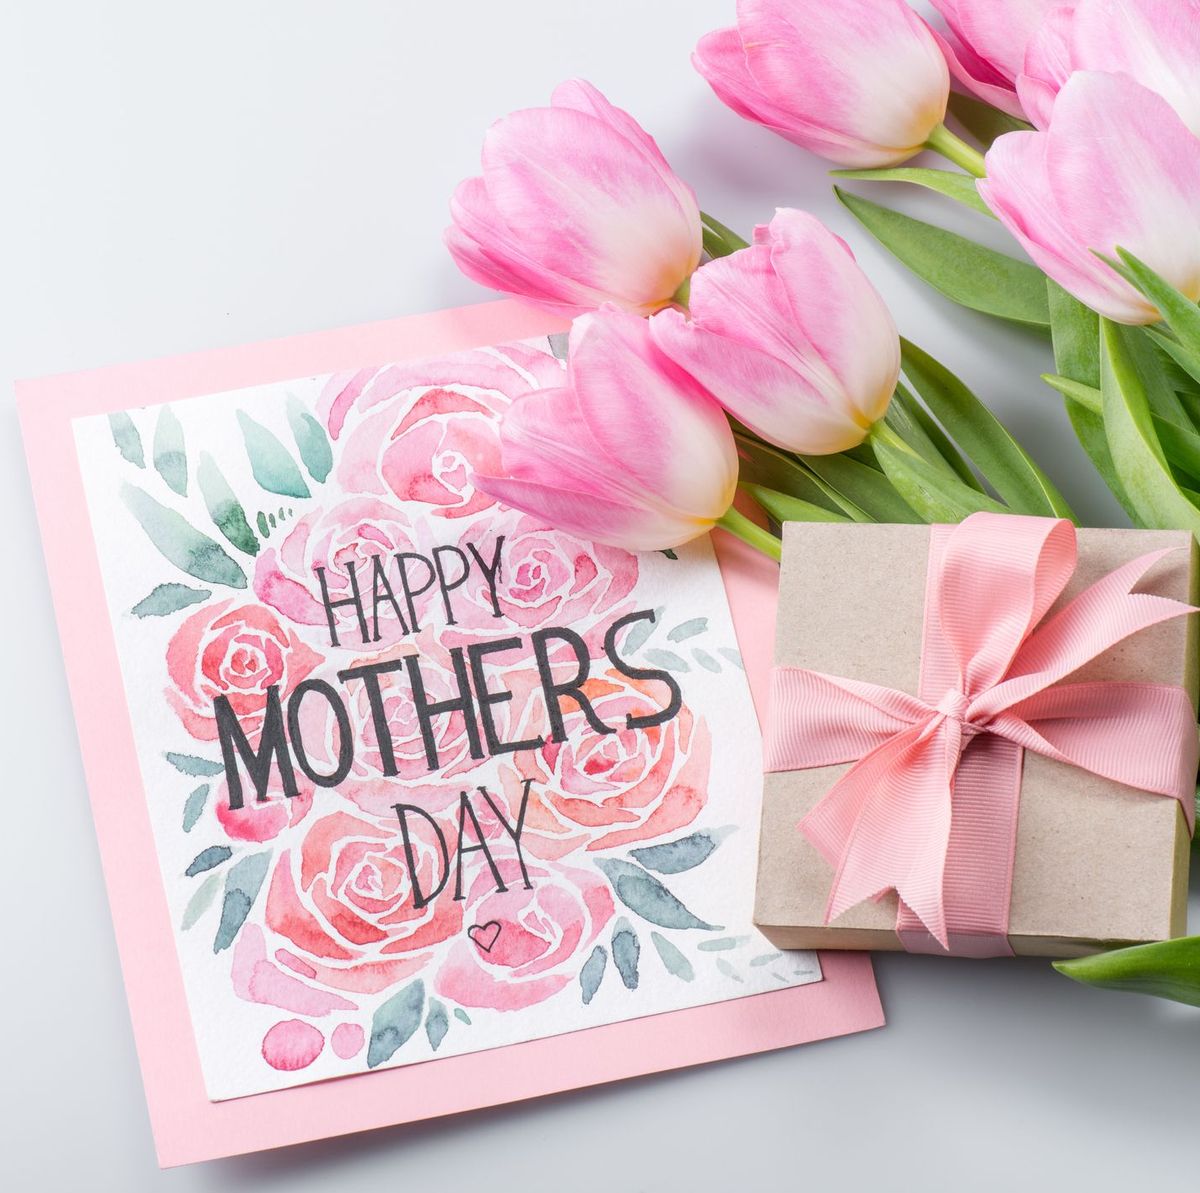 https://hips.hearstapps.com/hmg-prod/images/what-to-write-in-a-mothers-day-card-1584543780.jpg?crop=0.671xw:1.00xh;0.171xw,0&resize=1200:*